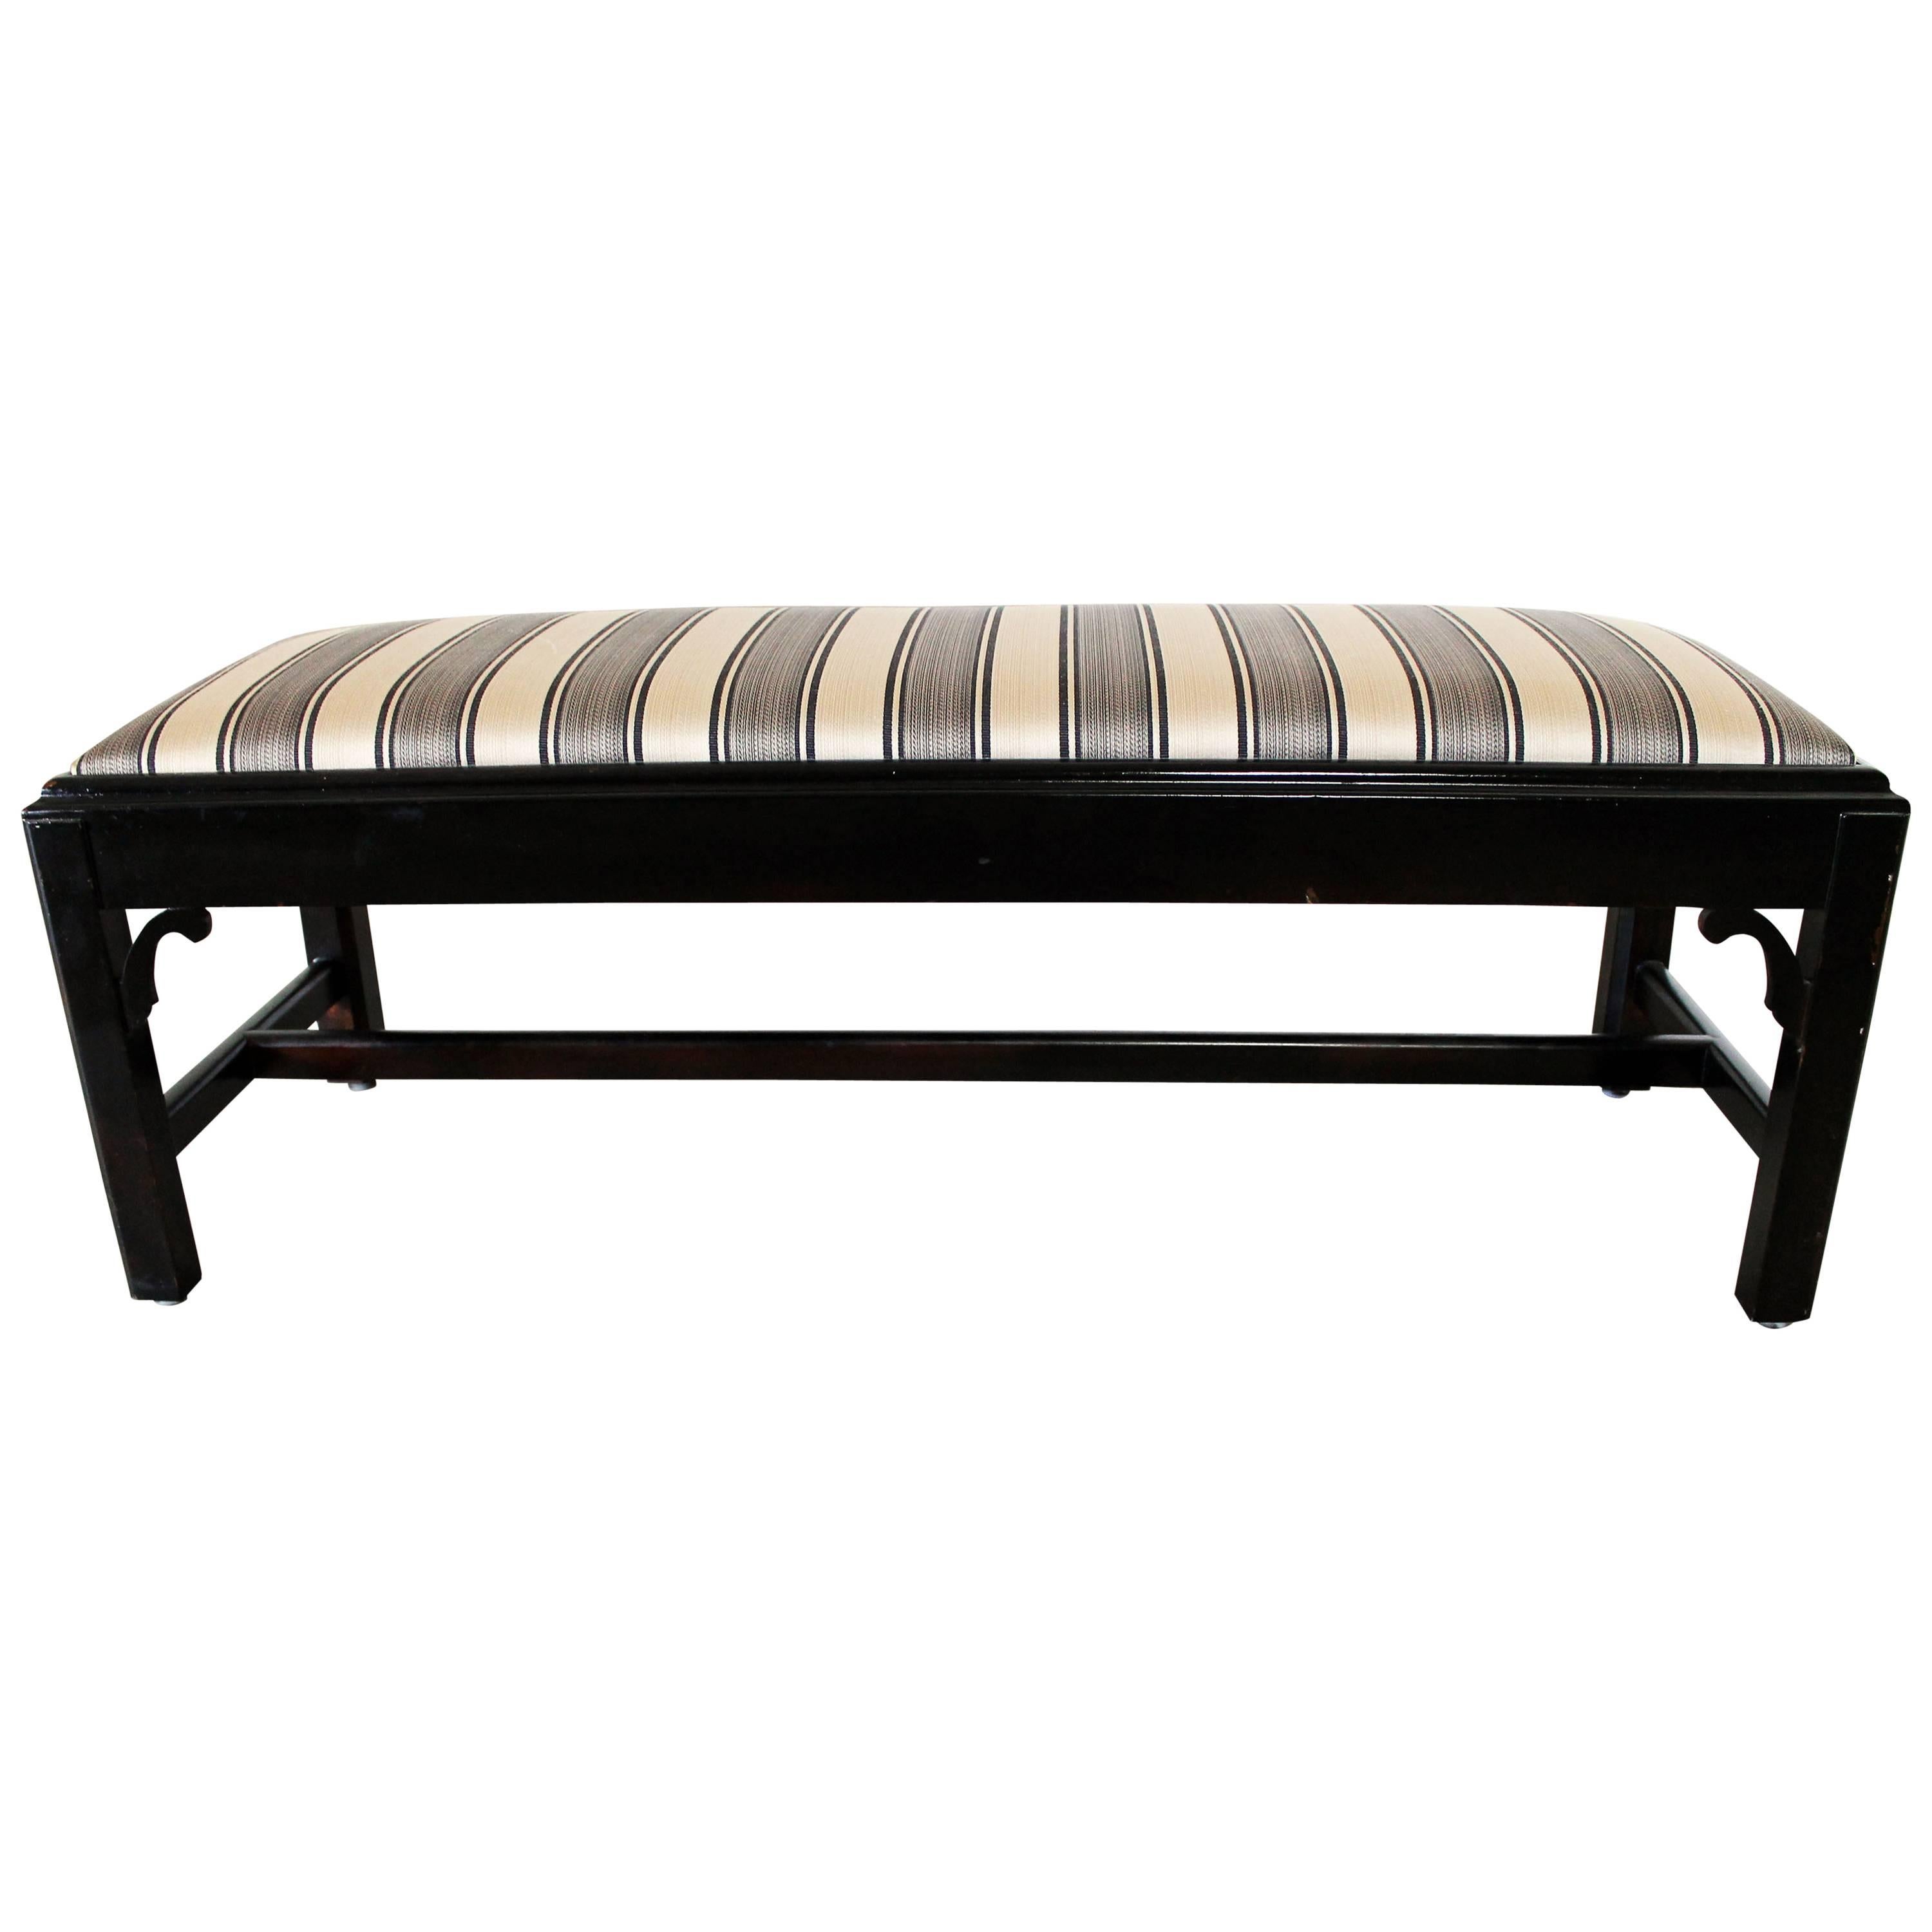 Vintage Black Chinese Chippendale-Style Bench with Black and Gold Upholstery